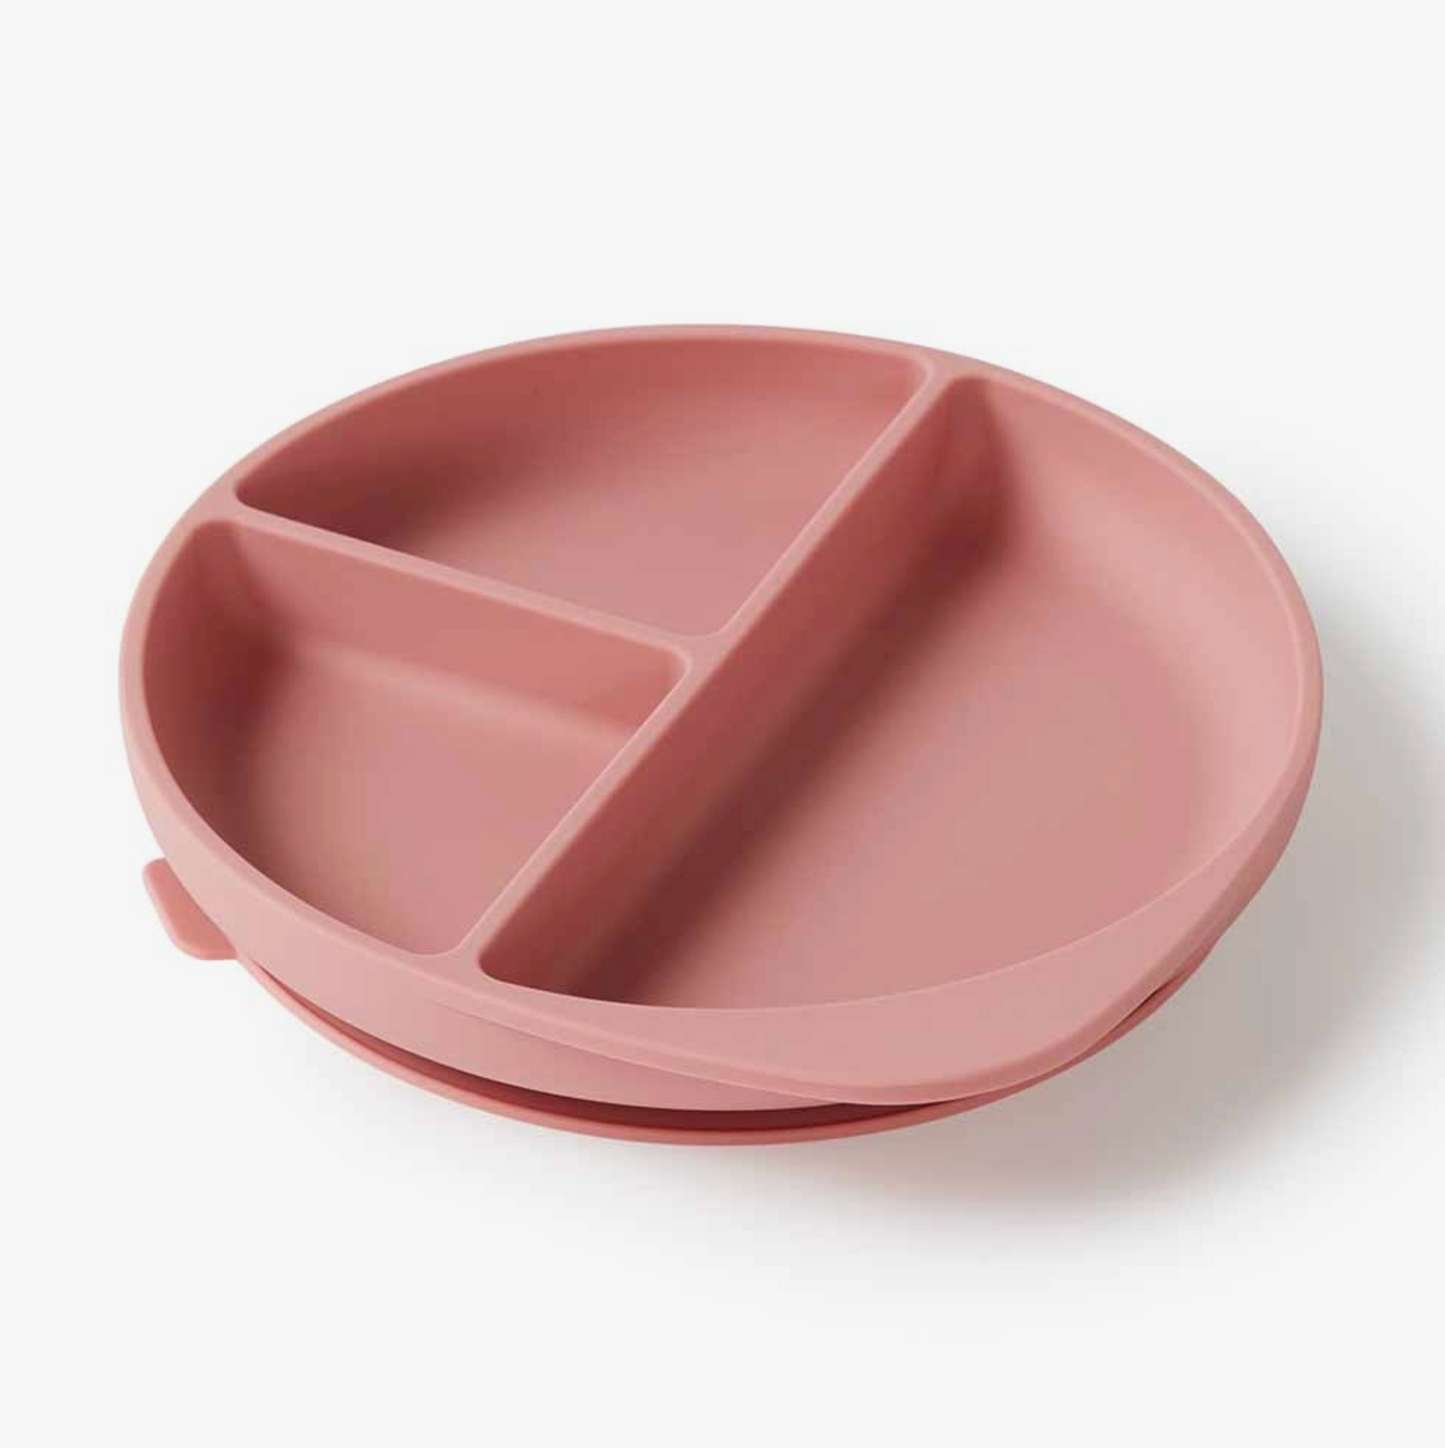 Snuggle Hunny - Silicone Suction Plate (Rose)